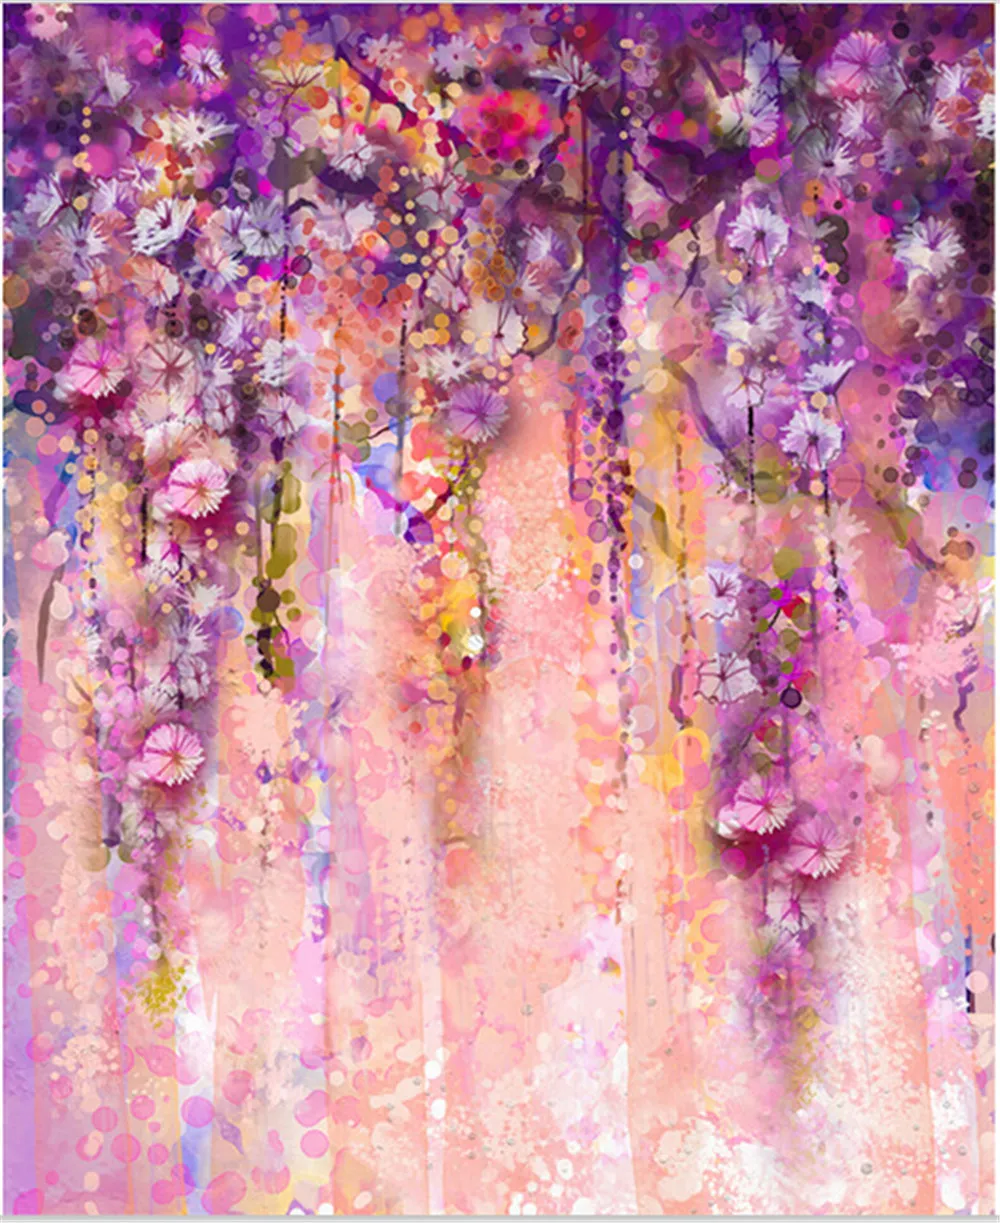 Oil Painting Floral Photography Backdrops Purple Colored Flowers Newborn Baby Photo Booth Props Children Kids Birthday Studio Background